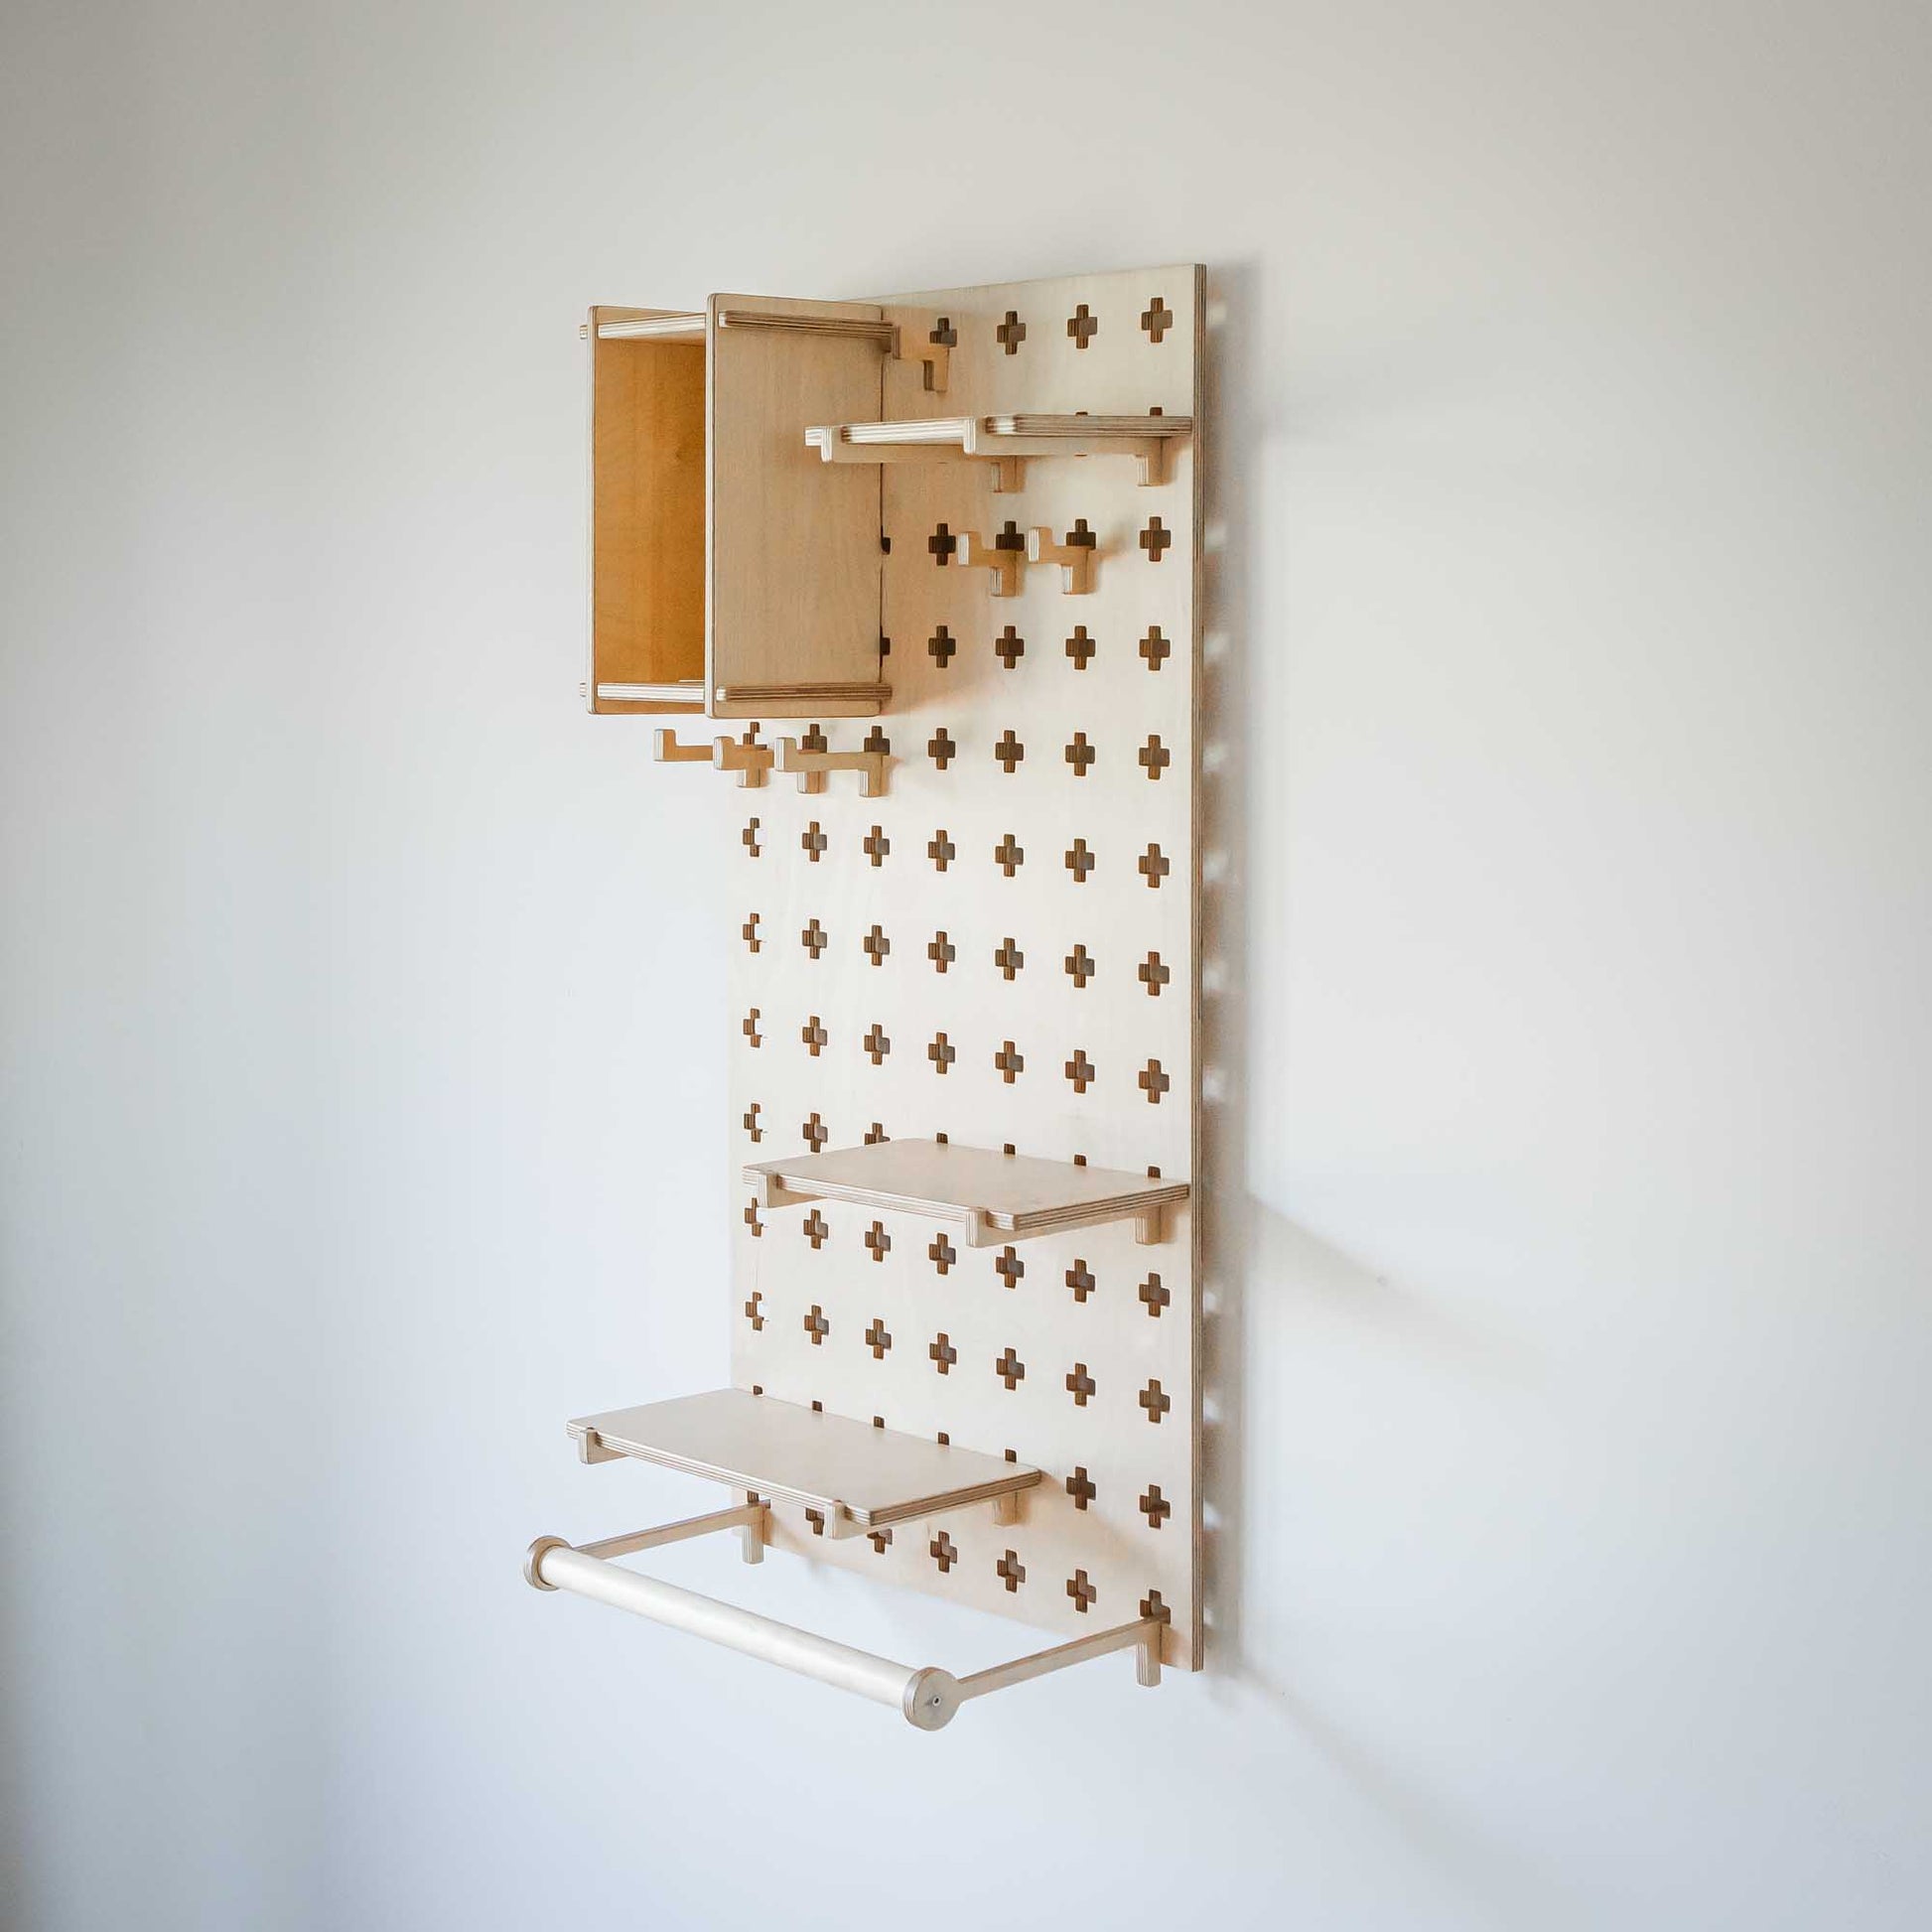 An open storage Sweet HOME from wood wooden shelf with Pegboard with Clothes Hanger hanging on it.